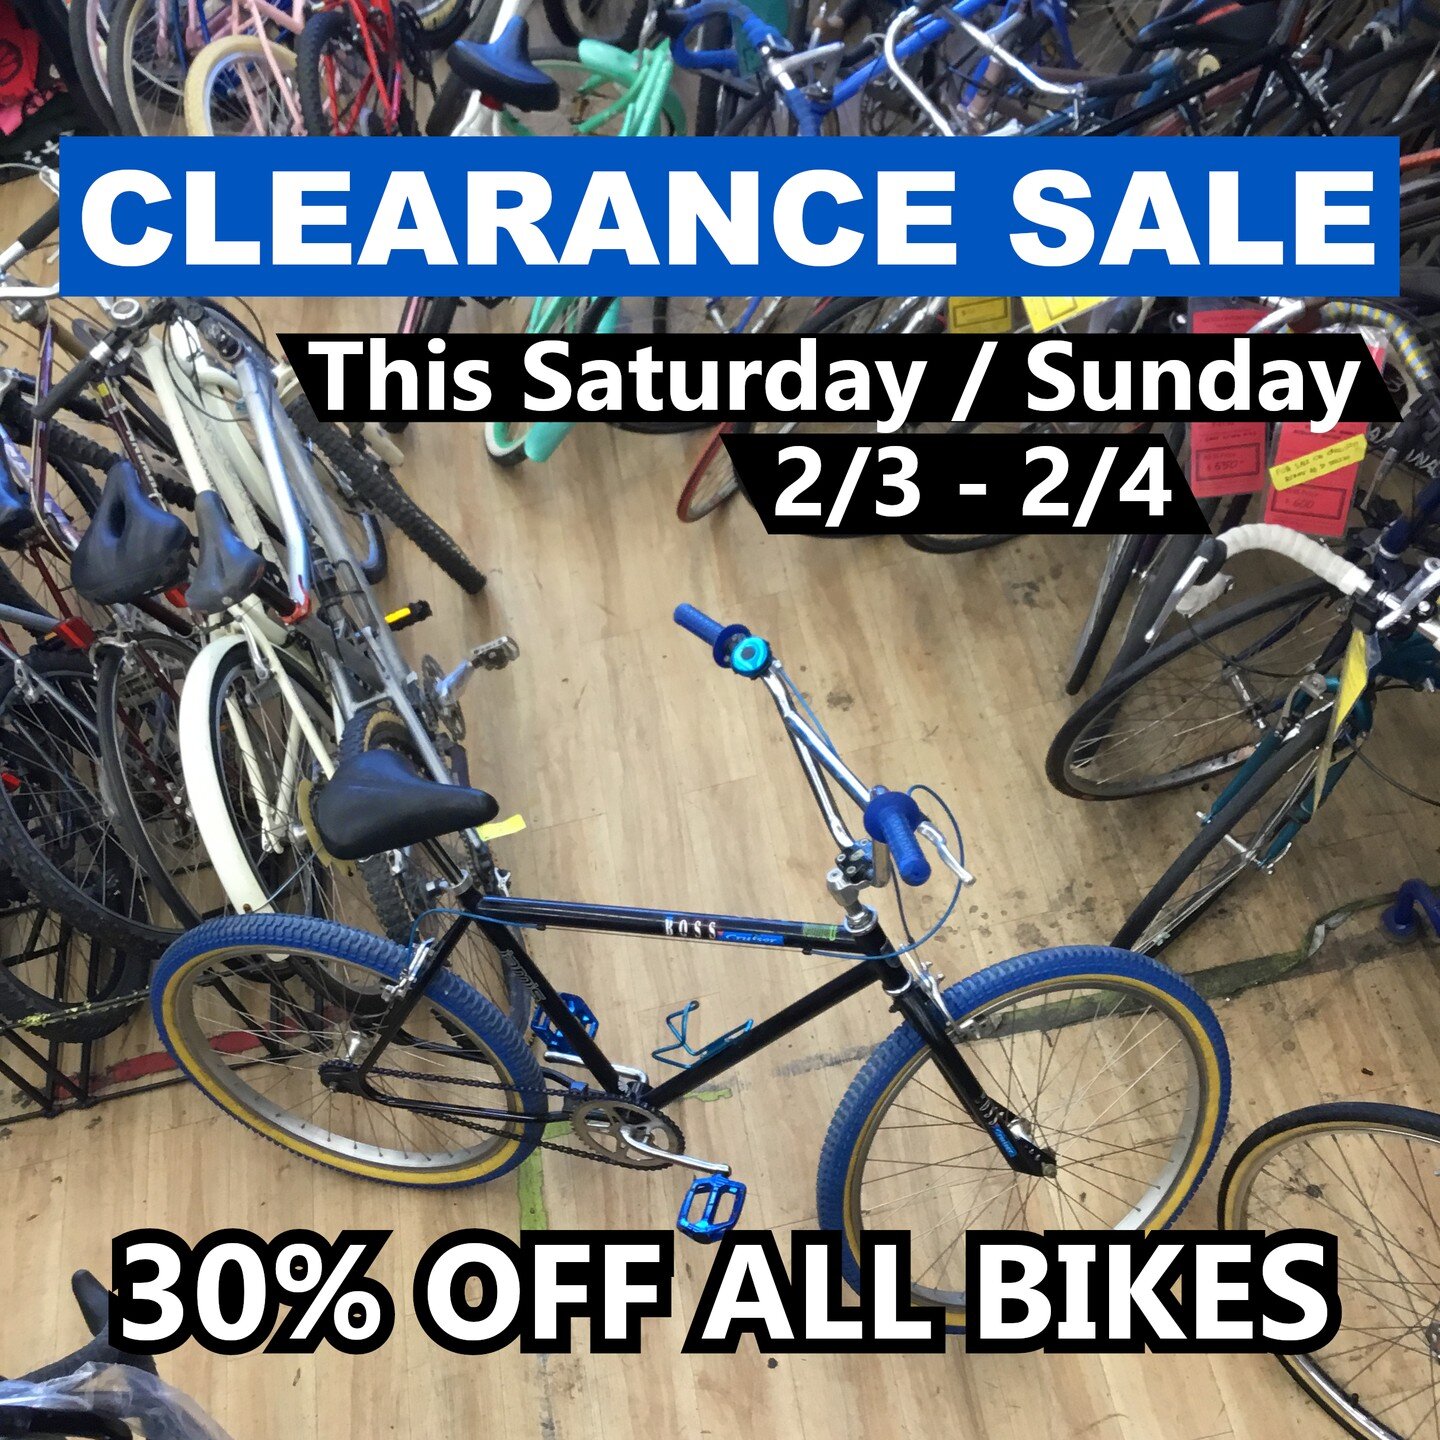 We've been blessed with an abundance of bicycles, and now it's time for them to find new homes! This weekend (Saturday 2/3 - Sunday 2/4) we're selling bikes at 30% off, both as-is and ready-to-ride. Come and get 'em while they last!
--
&iexcl;Hemos s